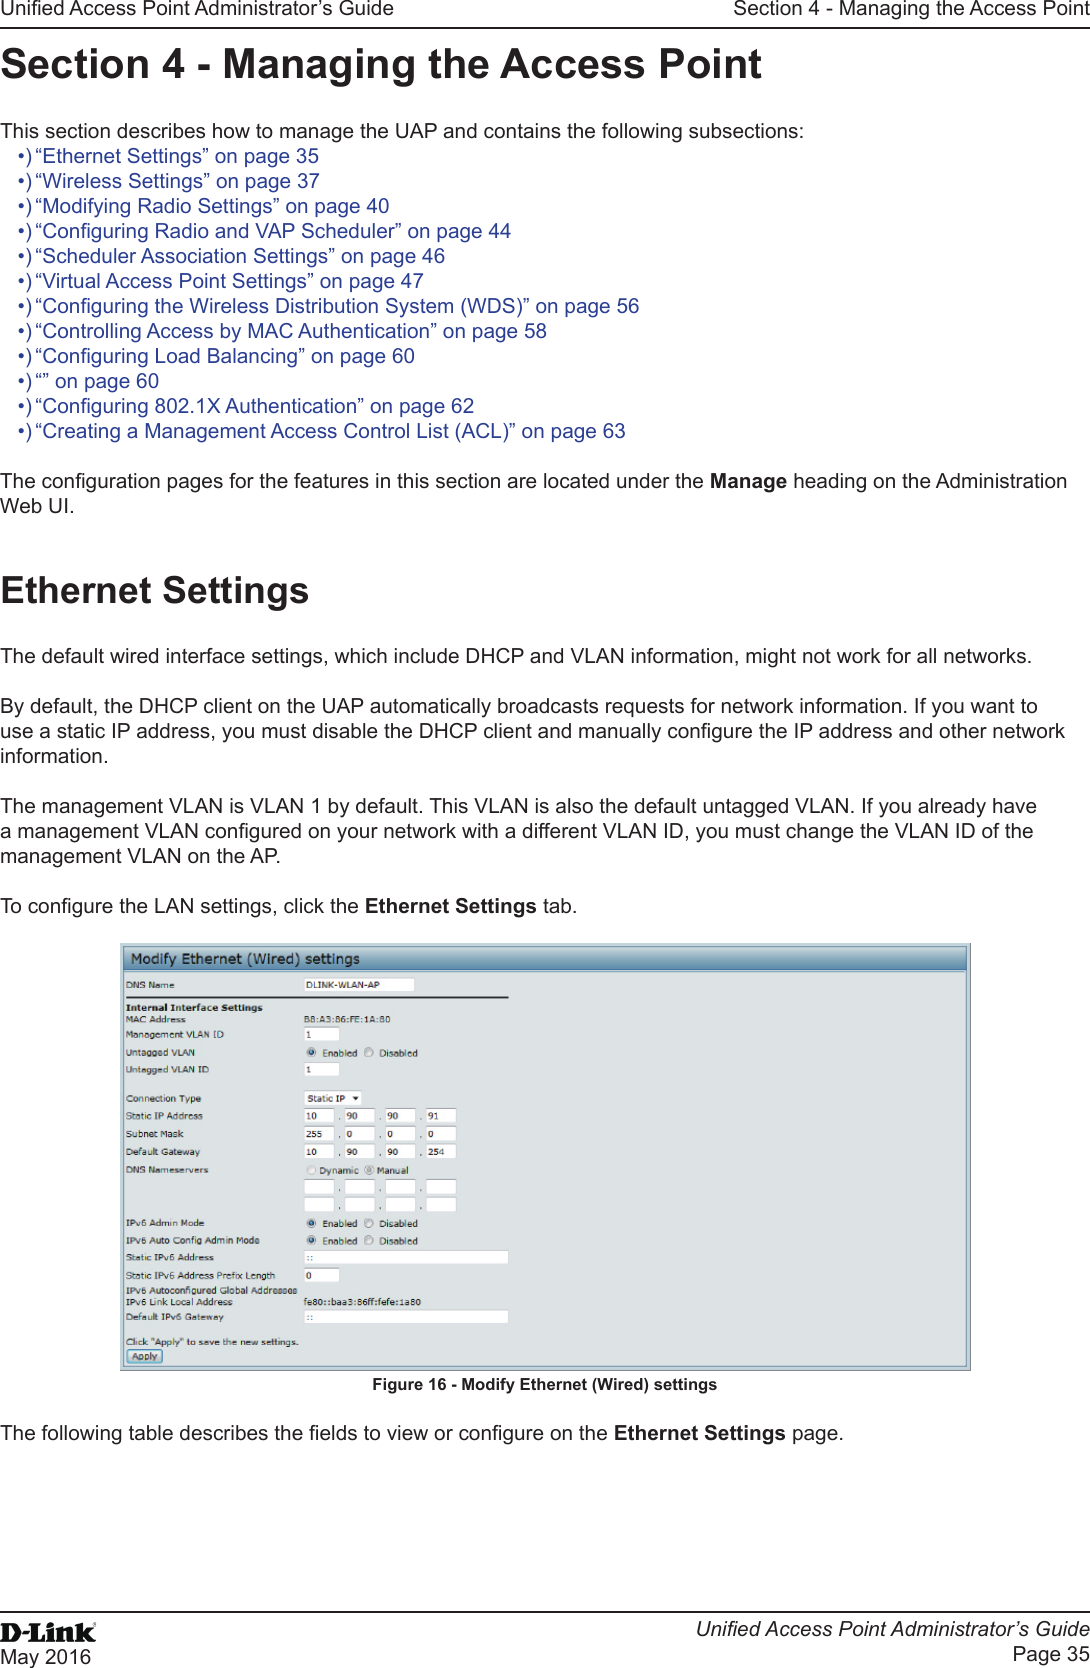 Unied Access Point Administrator’s GuideUnied Access Point Administrator’s GuidePage 35May 2016Section 4 - Managing the Access PointSection 4 - Managing the Access PointThis section describes how to manage the UAP and contains the following subsections:•) “Ethernet Settings” on page 35•) “Wireless Settings” on page 37•) “Modifying Radio Settings” on page 40•) “Conguring Radio and VAP Scheduler” on page 44•) “Scheduler Association Settings” on page 46•) “Virtual Access Point Settings” on page 47•) “Conguring the Wireless Distribution System (WDS)” on page 56•) “Controlling Access by MAC Authentication” on page 58•) “Conguring Load Balancing” on page 60•) “” on page 60•) “Conguring 802.1X Authentication” on page 62•) “Creating a Management Access Control List (ACL)” on page 63The conguration pages for the features in this section are located under the Manage heading on the Administration Web UI.Ethernet SettingsThe default wired interface settings, which include DHCP and VLAN information, might not work for all networks. By default, the DHCP client on the UAP automatically broadcasts requests for network information. If you want to use a static IP address, you must disable the DHCP client and manually congure the IP address and other network information.The management VLAN is VLAN 1 by default. This VLAN is also the default untagged VLAN. If you already have a management VLAN congured on your network with a different VLAN ID, you must change the VLAN ID of the management VLAN on the AP.To congure the LAN settings, click the Ethernet Settings tab.Figure 16 - Modify Ethernet (Wired) settingsThe following table describes the elds to view or congure on the Ethernet Settings page.